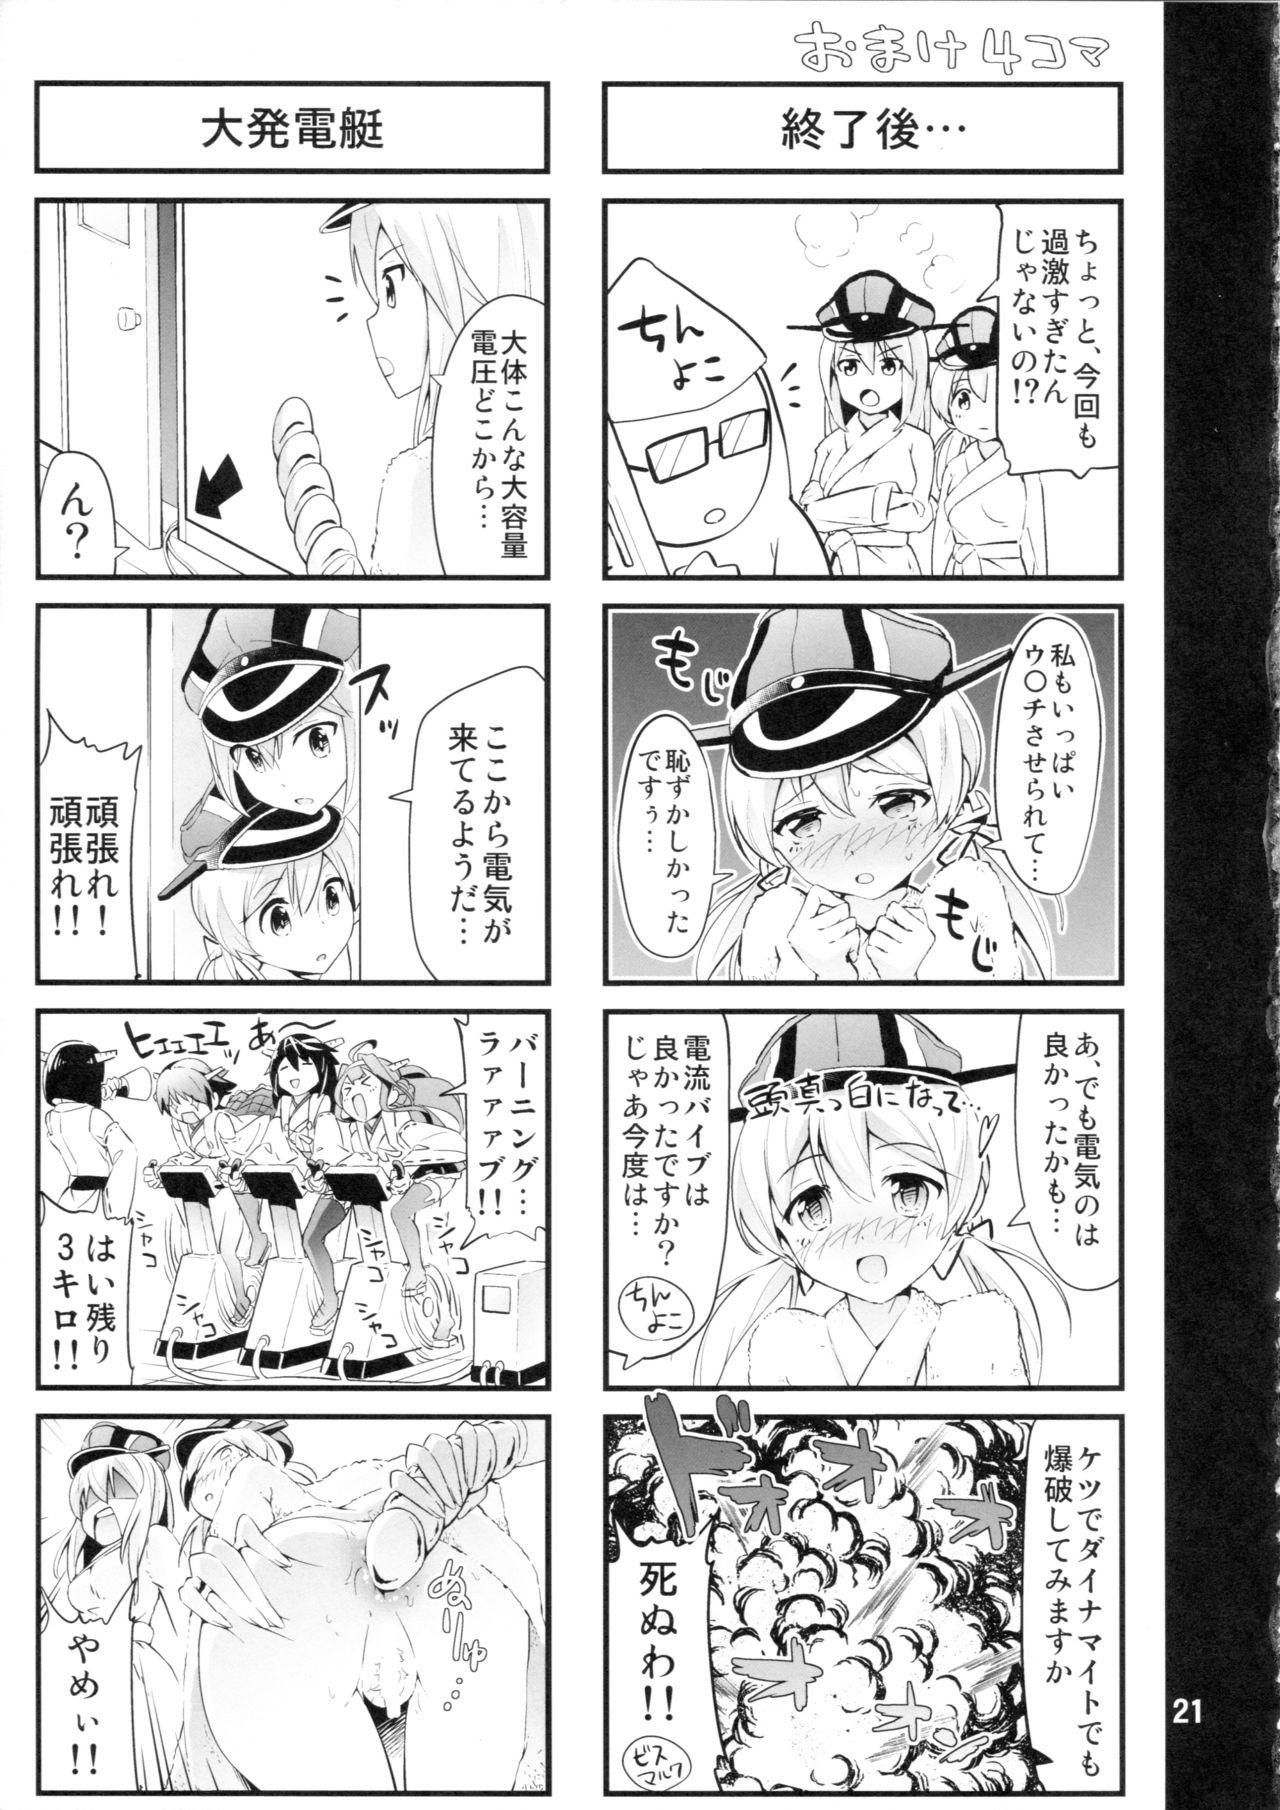 Amature ICE WORK 4 - Kantai collection Show - Page 20